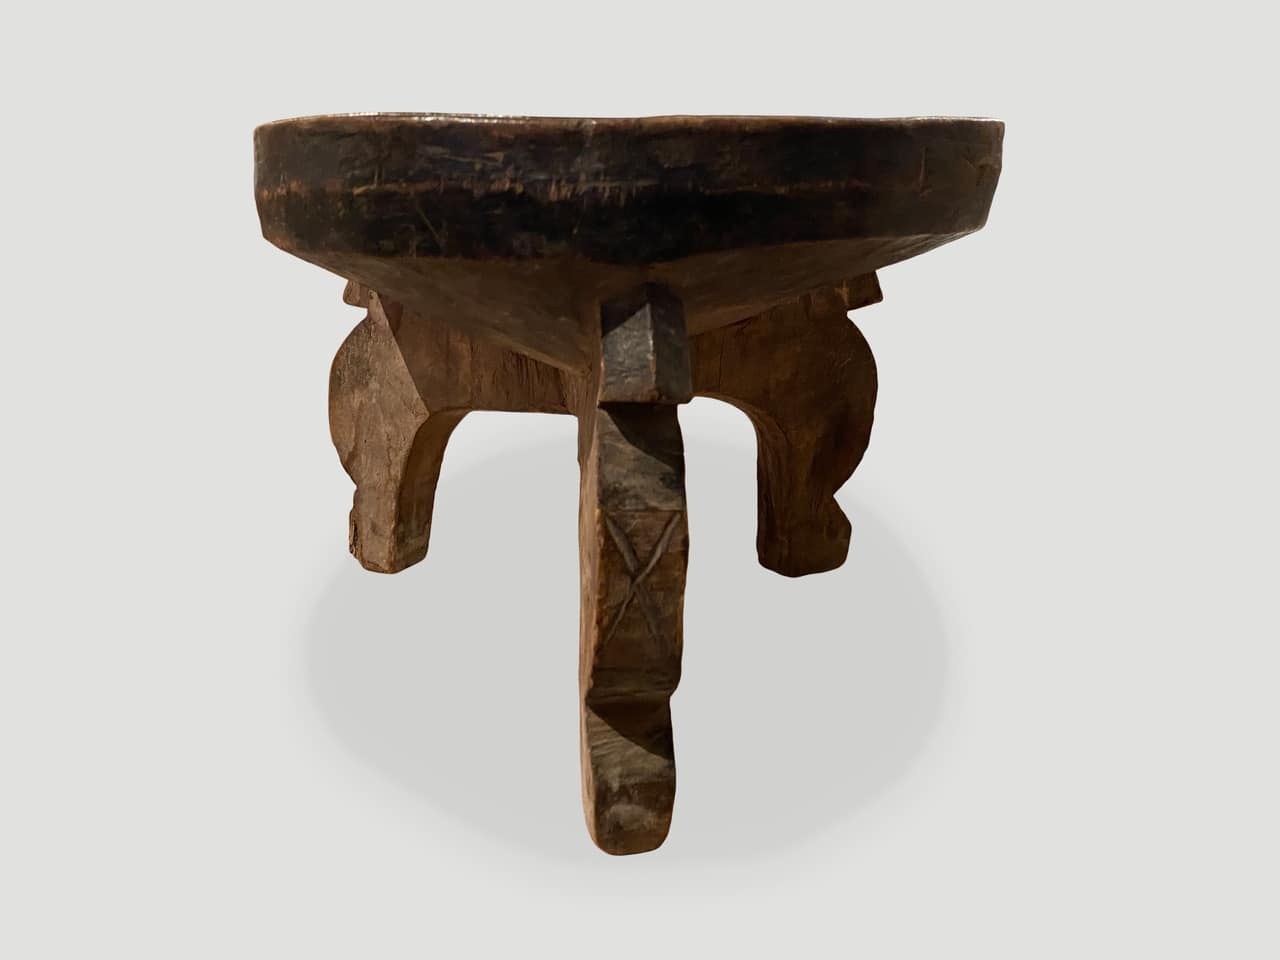 ANTIQUE AFRICAN TRAY SIDE TABLE OR BOWL